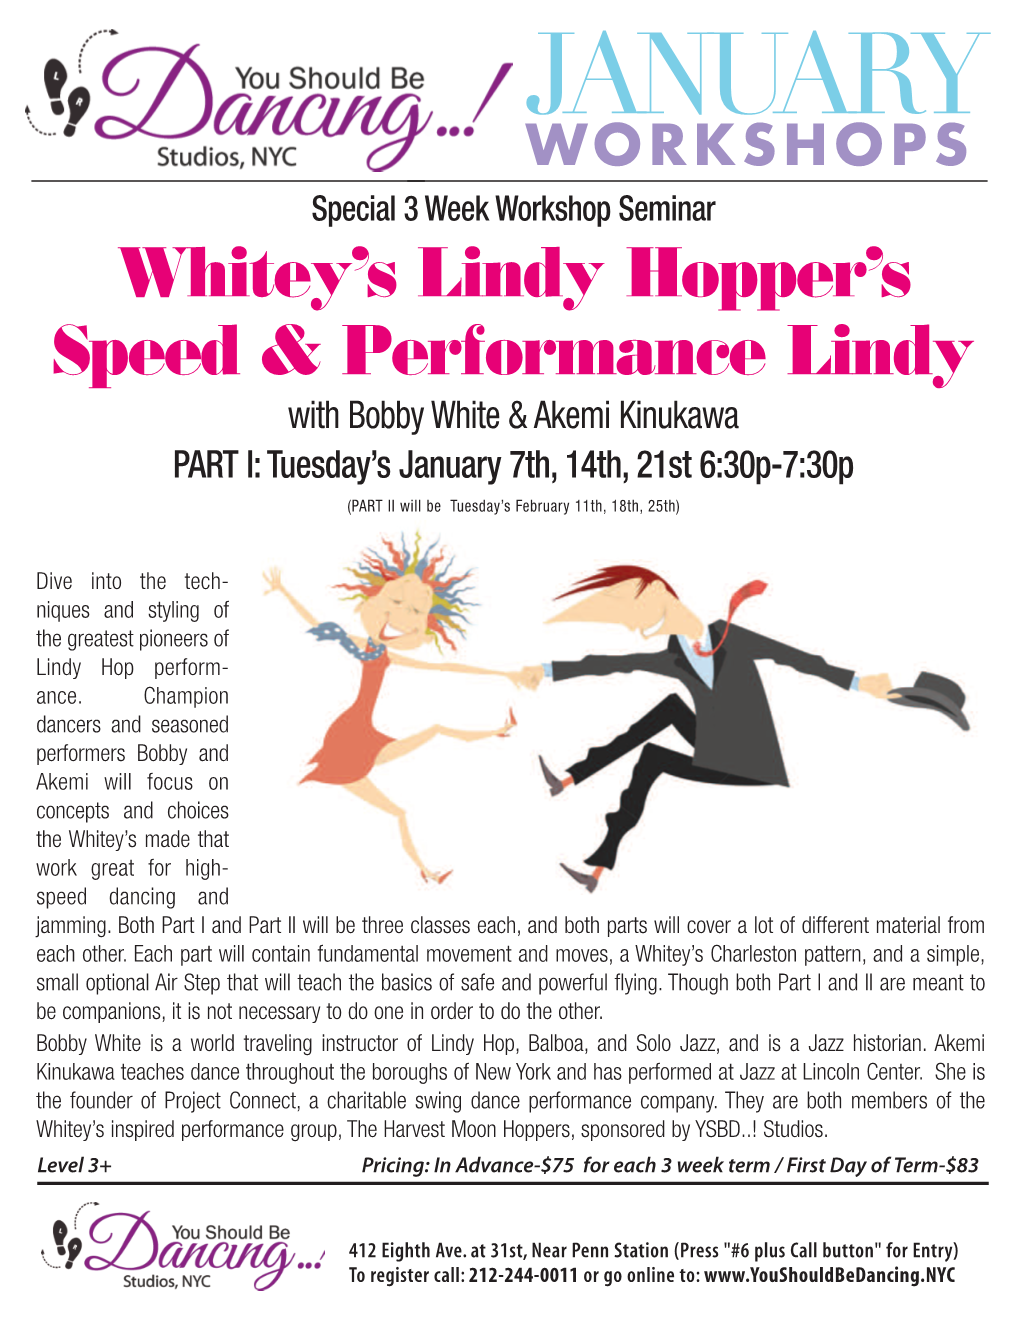 Whitey's Lindy Hopper's Speed & Performance Lindy